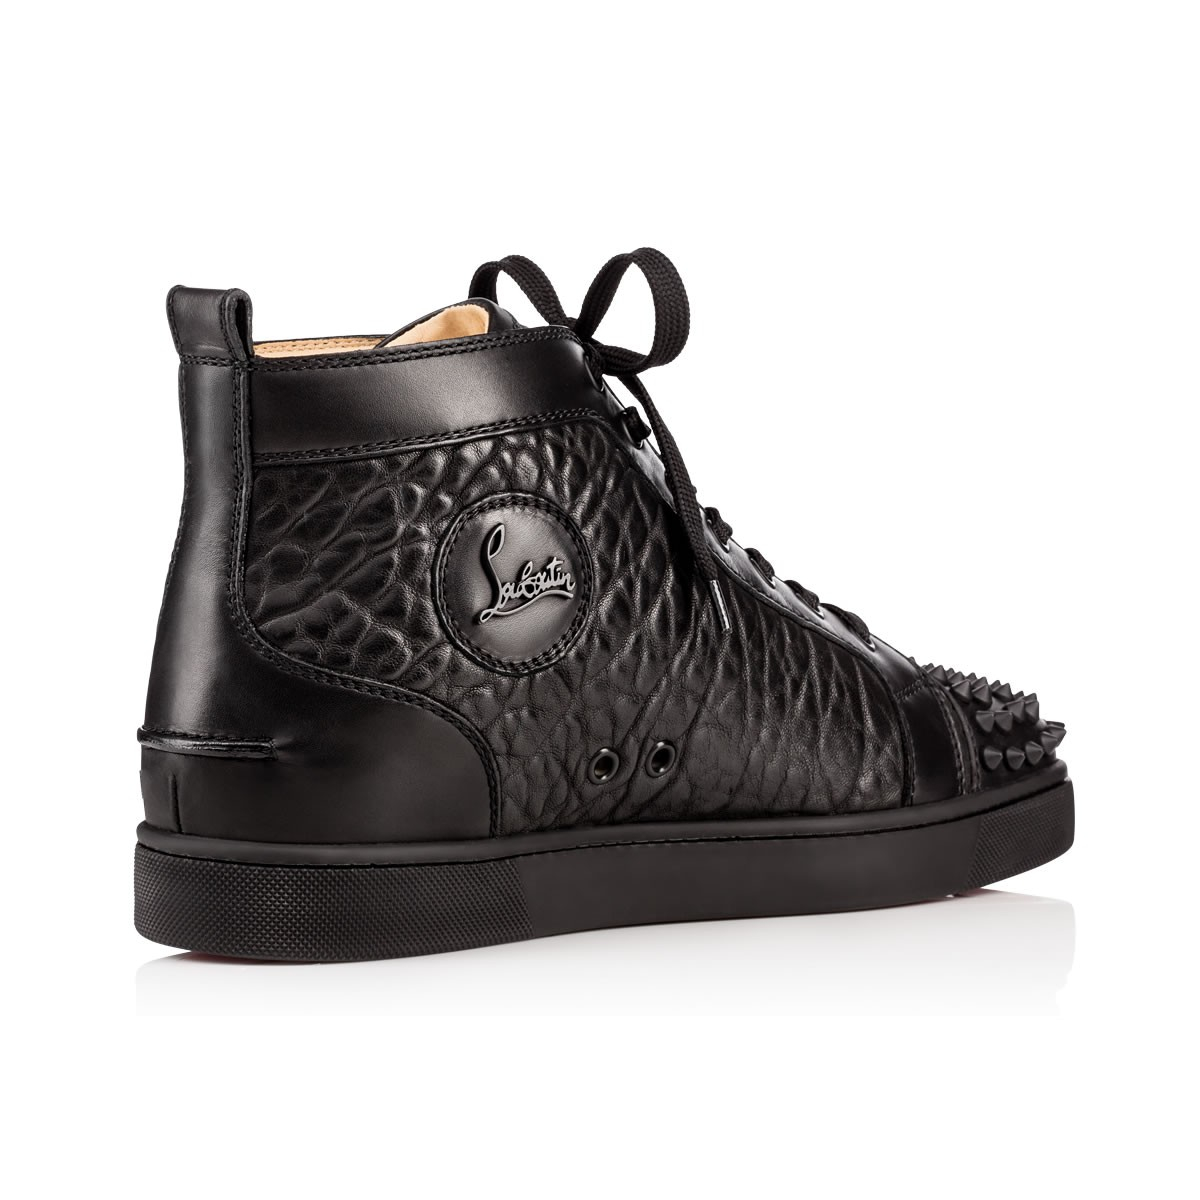 Lyst - Christian Louboutin Lou Spikes Leather Sneakers in Black for Men